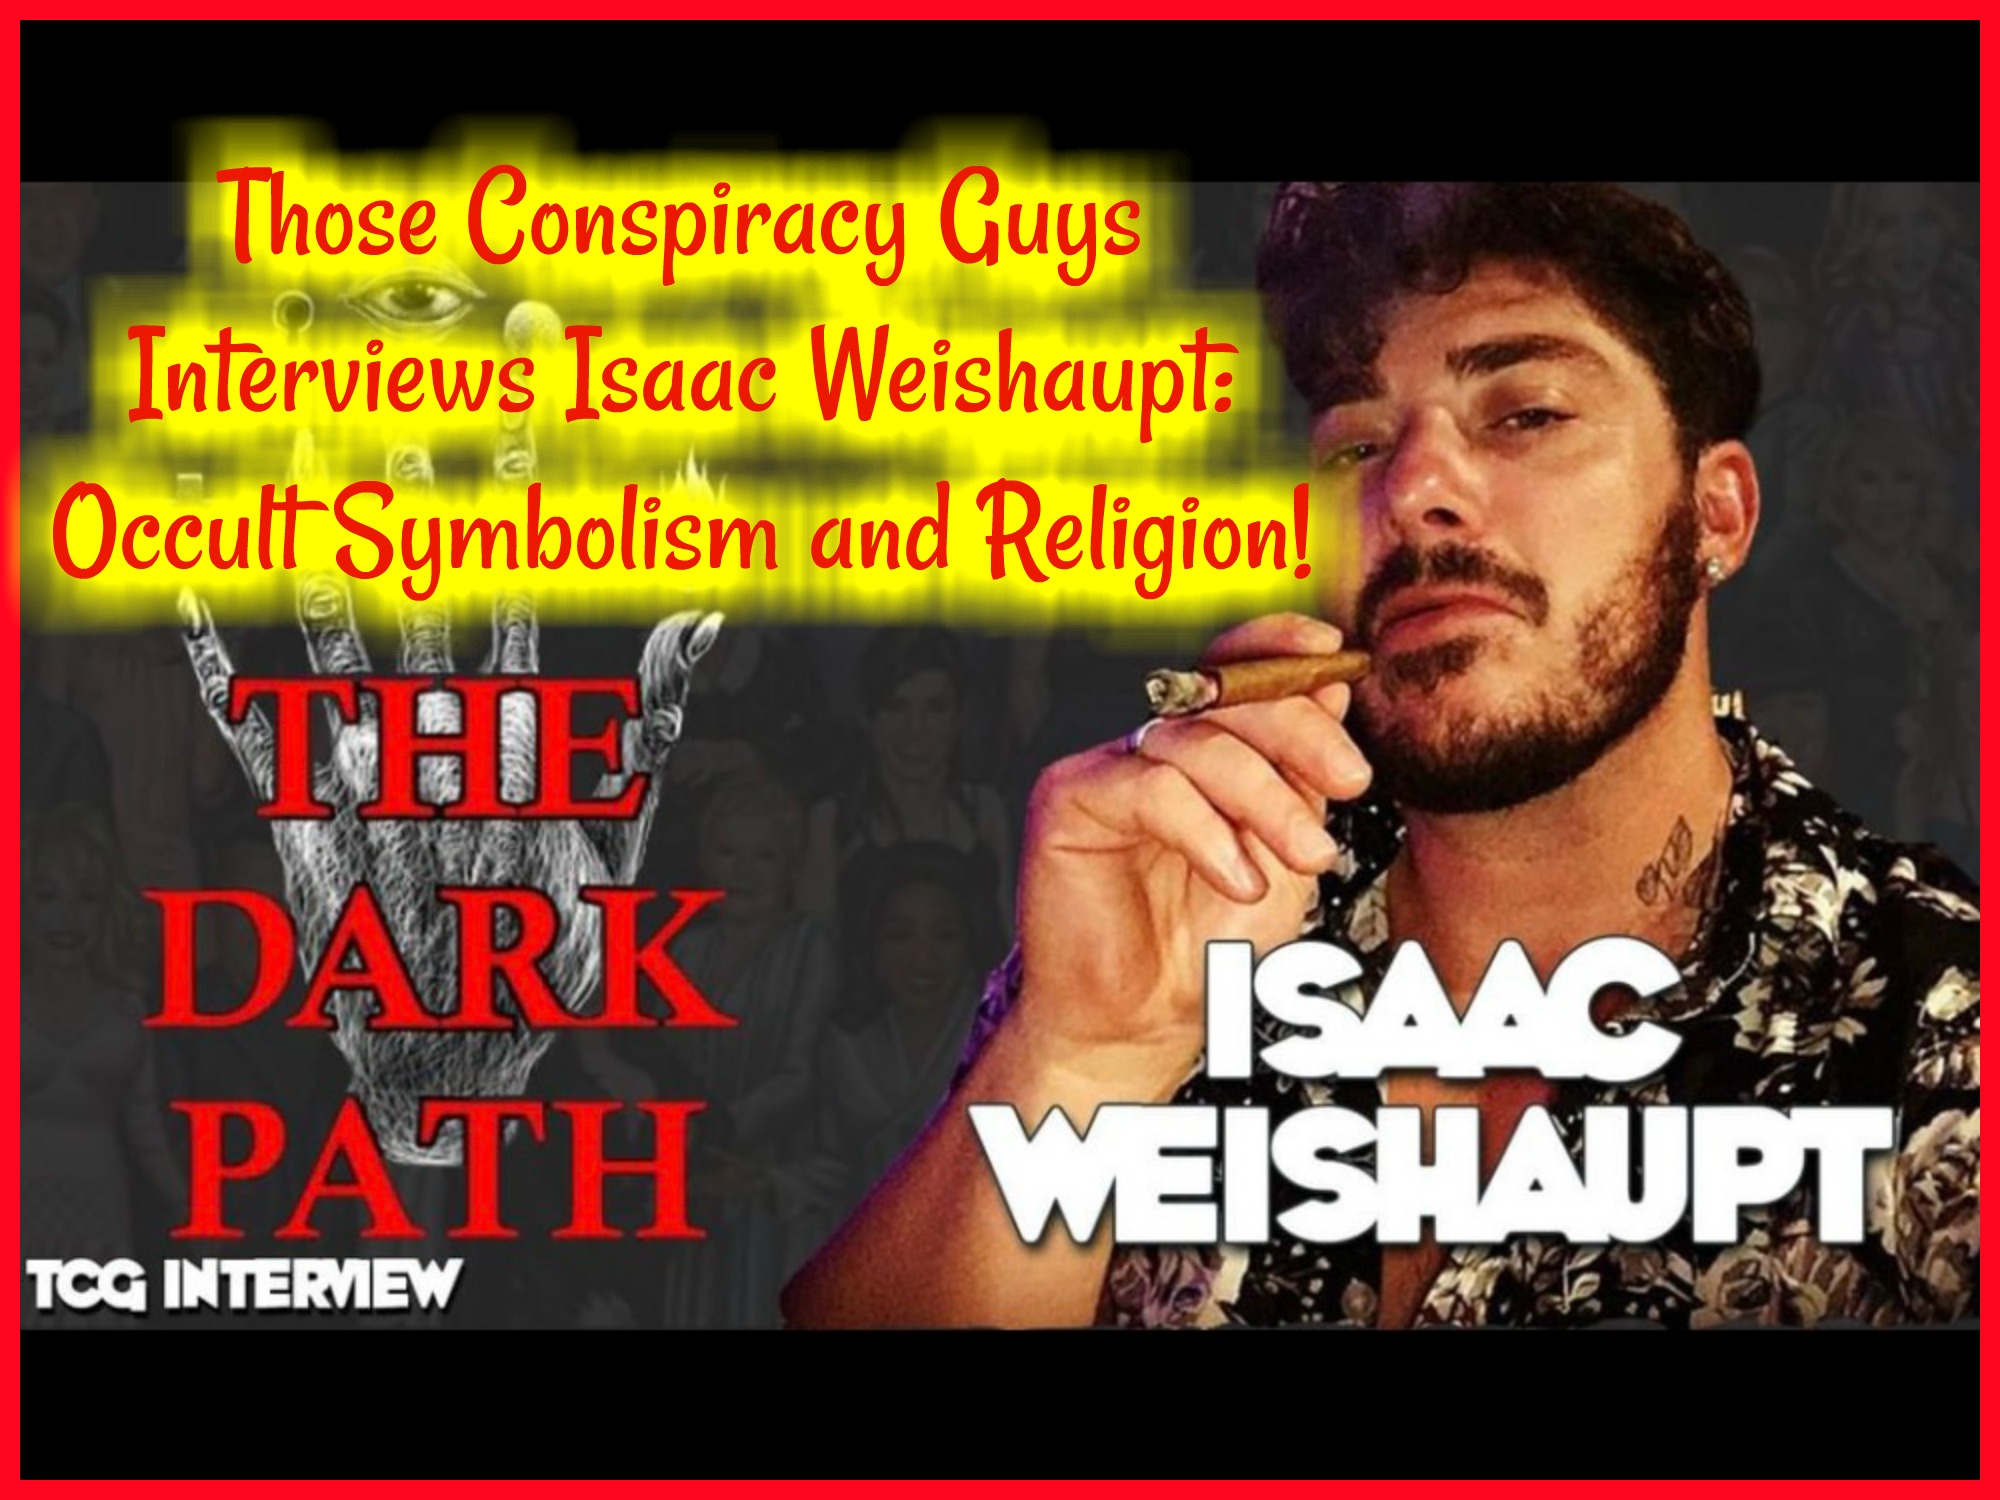 Those Conspiracy Guys Interviews Isaac Weishaupt: Occult Symbolism and Religion!